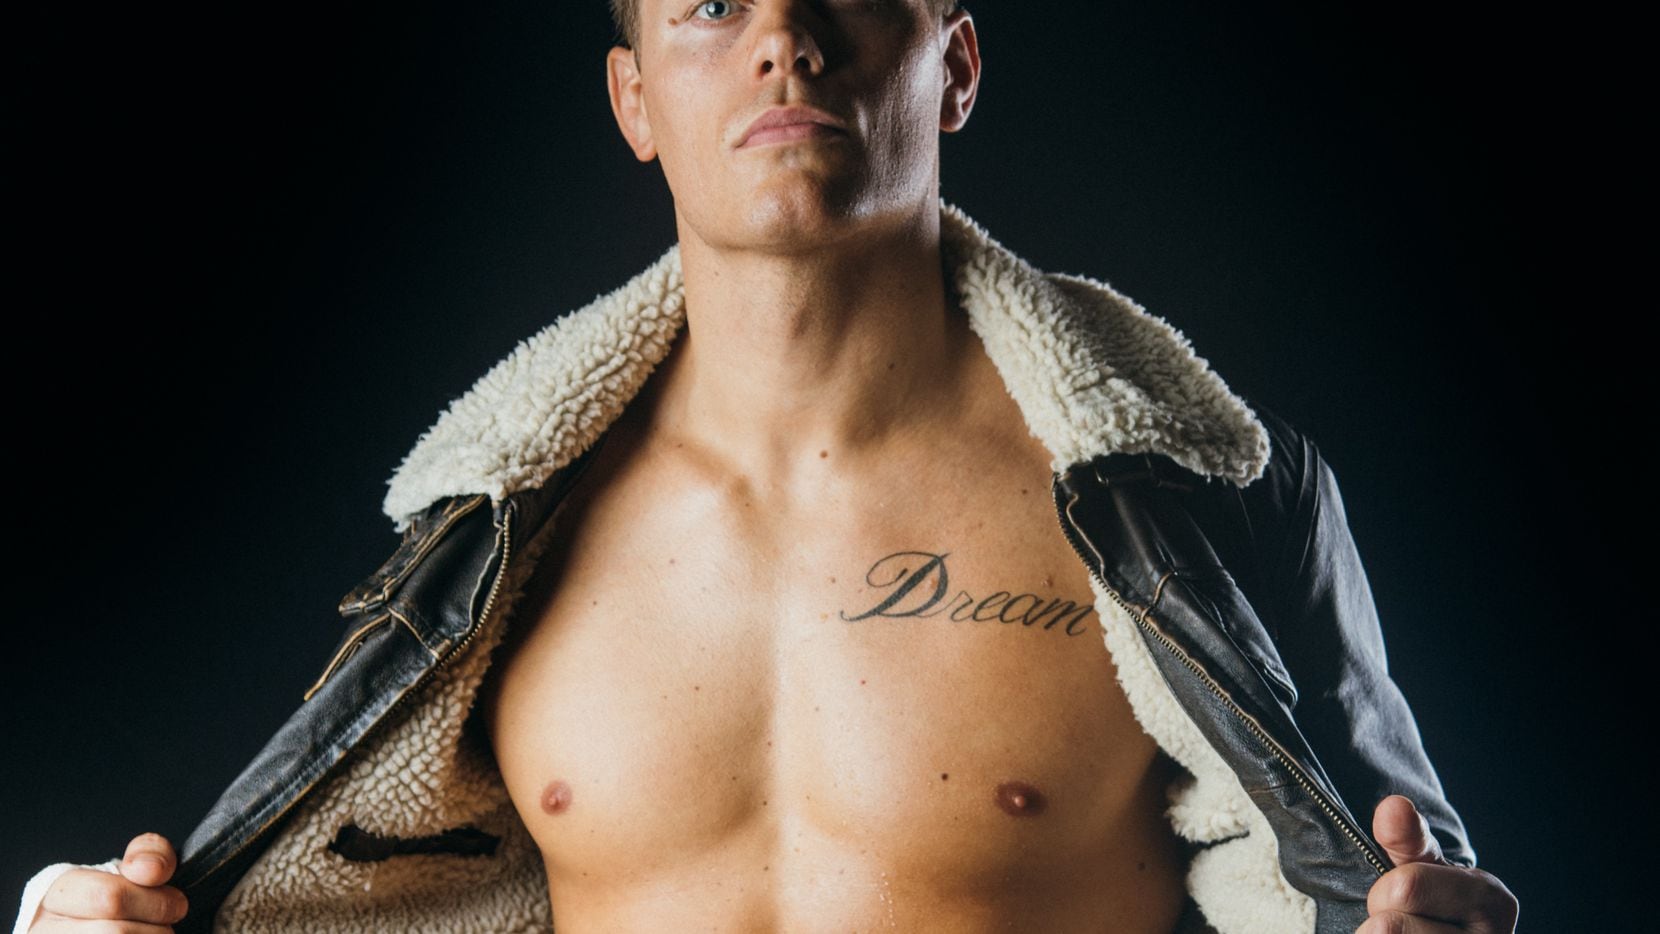 Former WWE wrestler Cody Rhodes will be performing with Ring of Honor at Gilley's in Dallas...